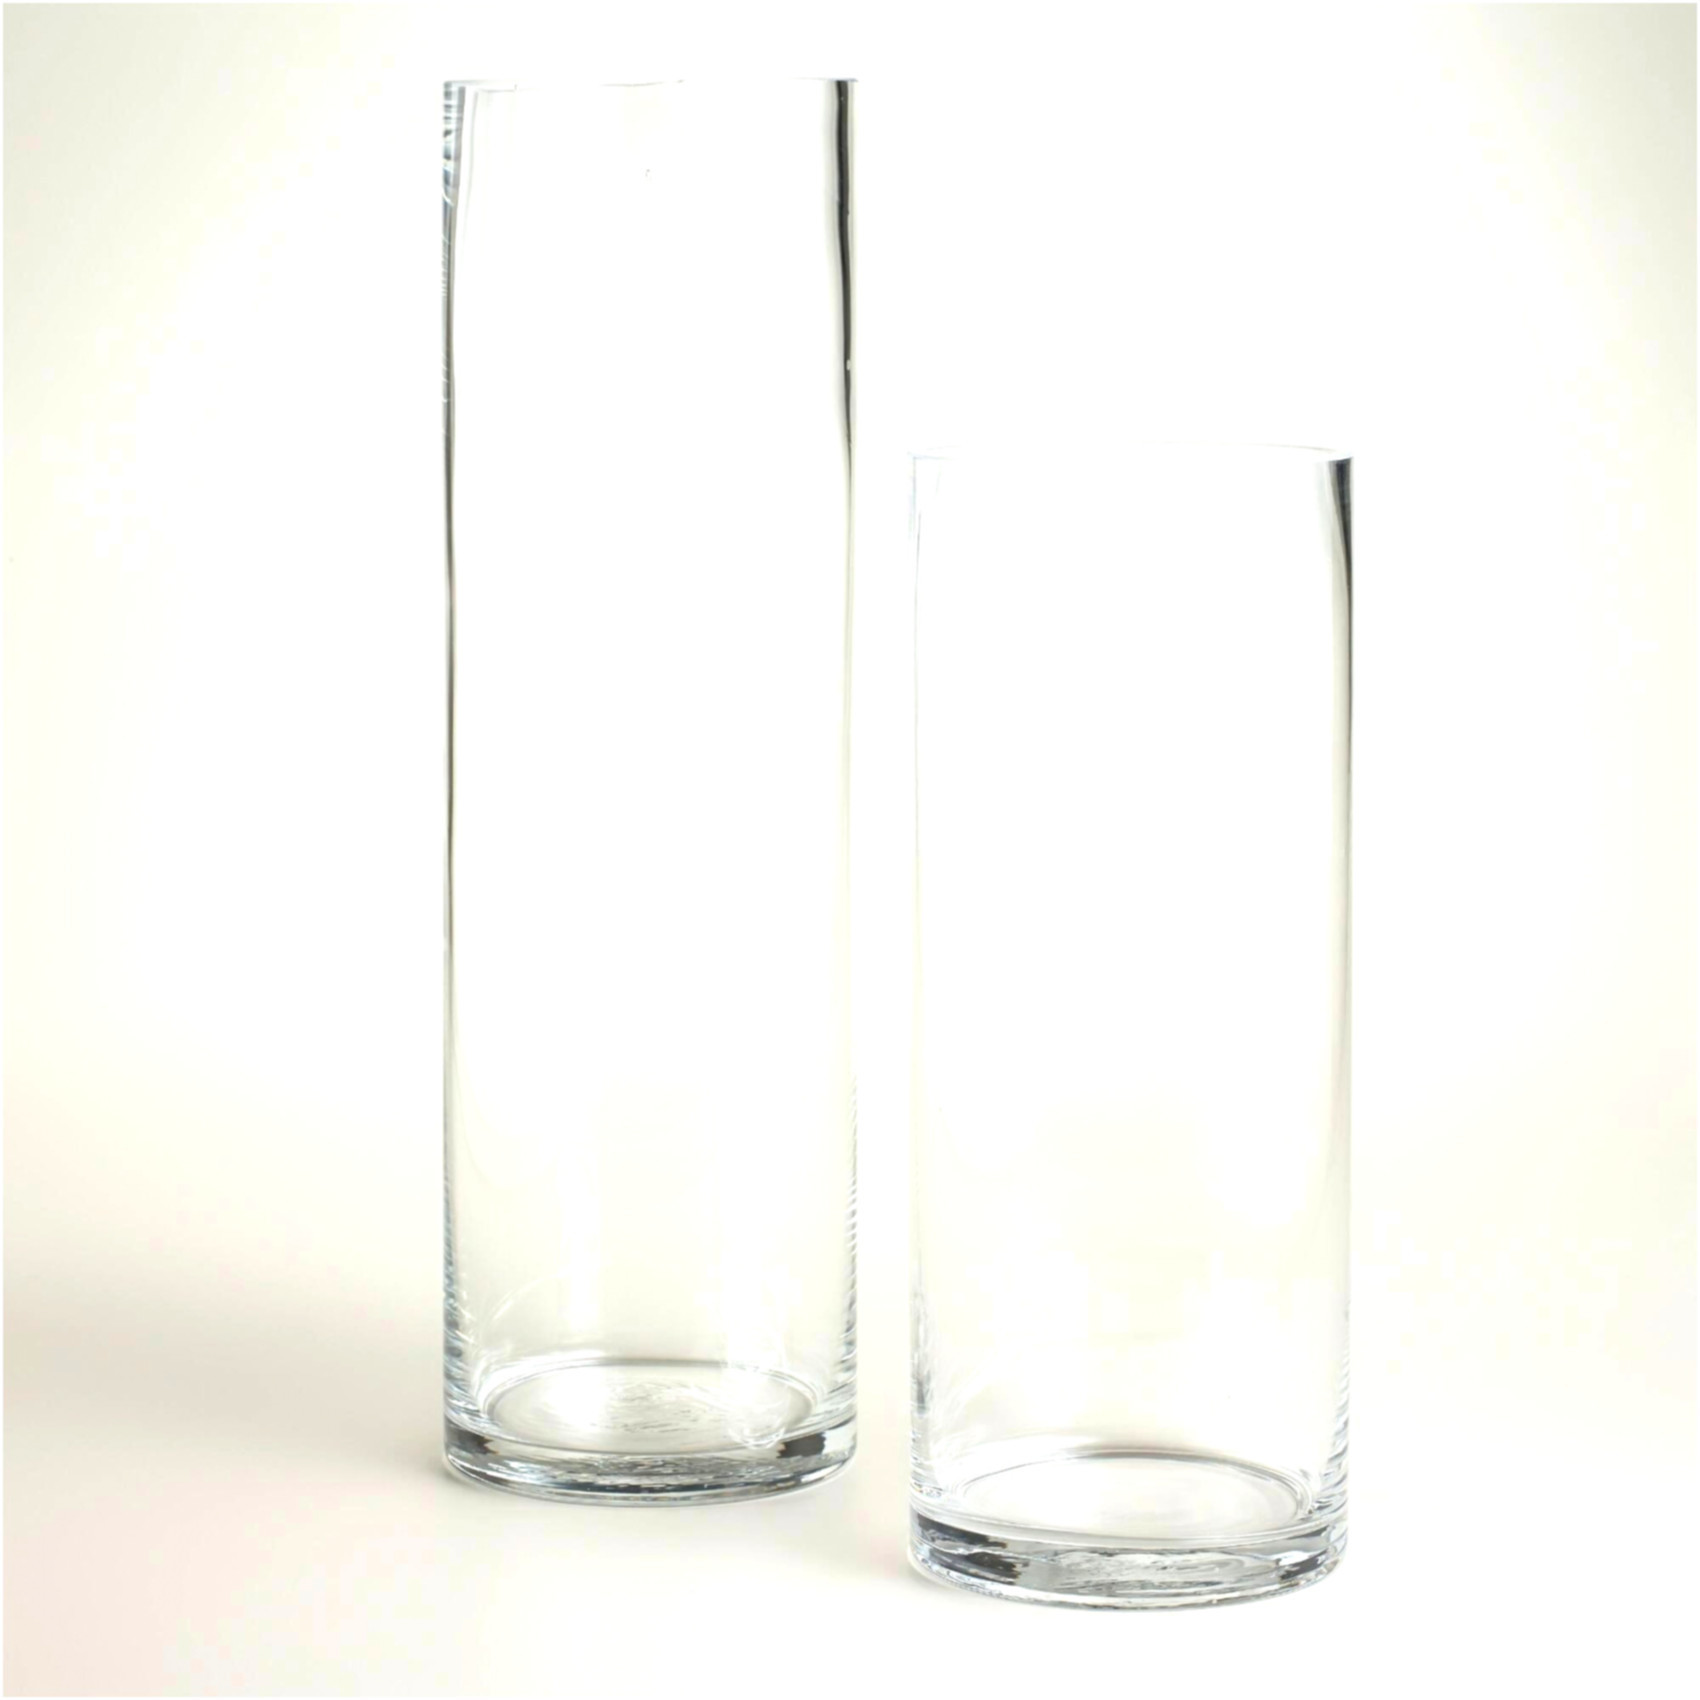 14 Fabulous Glass Cylinder Vase 12 X 5 2022 free download glass cylinder vase 12 x 5 of why you should not go to glass vases wholesale glass vases with regard to crystal glass vases wholesale inspirational 30 elegant vases with